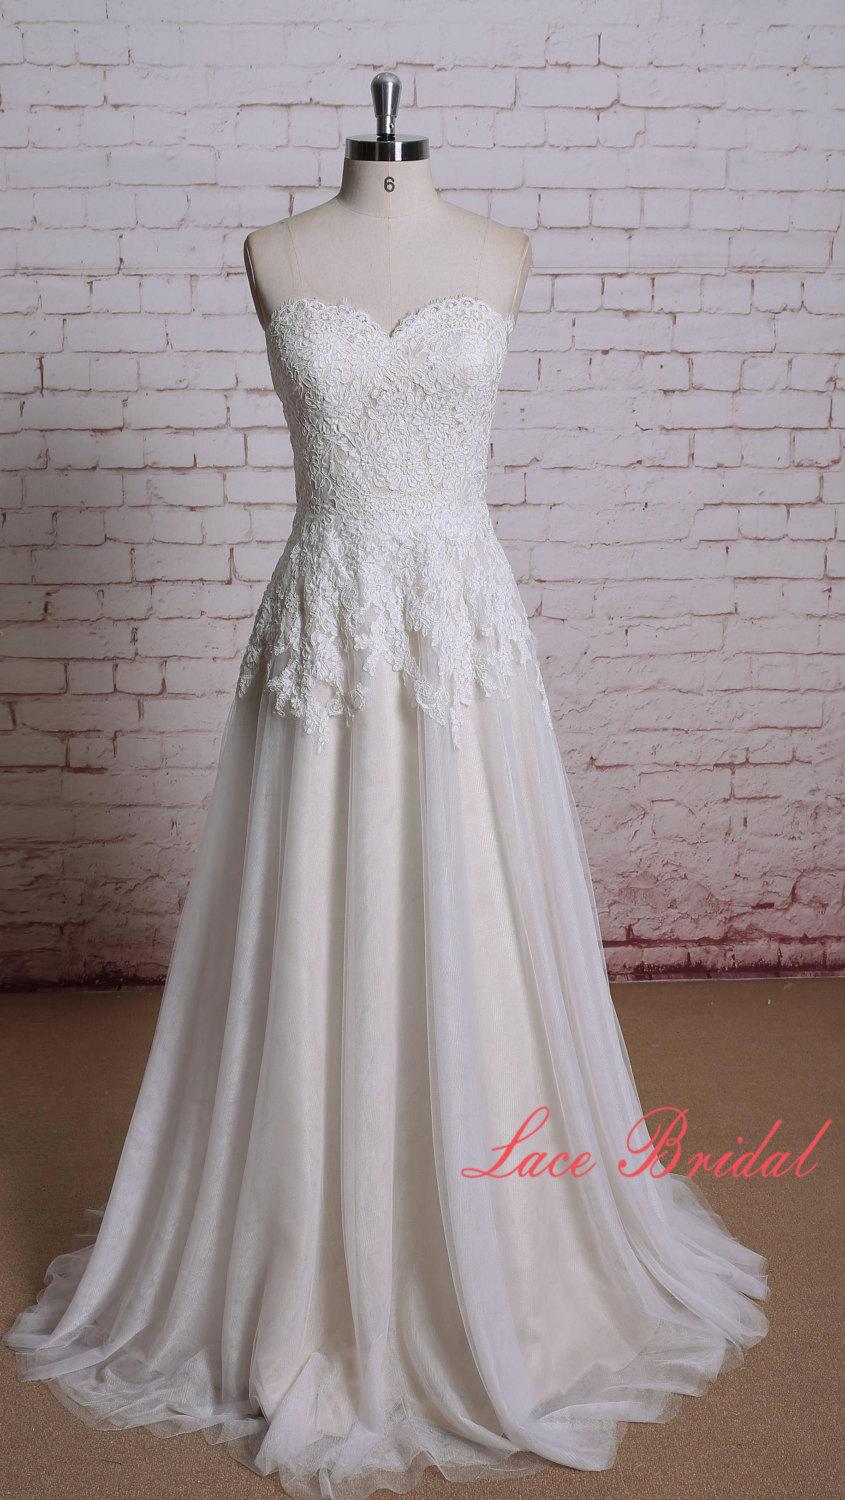 Mariage - Wedding dress of Sweetheart Neckline Ivory Color Lace with Champange underlay Bridal Gown A-line Wedding Dress with Sweep Train